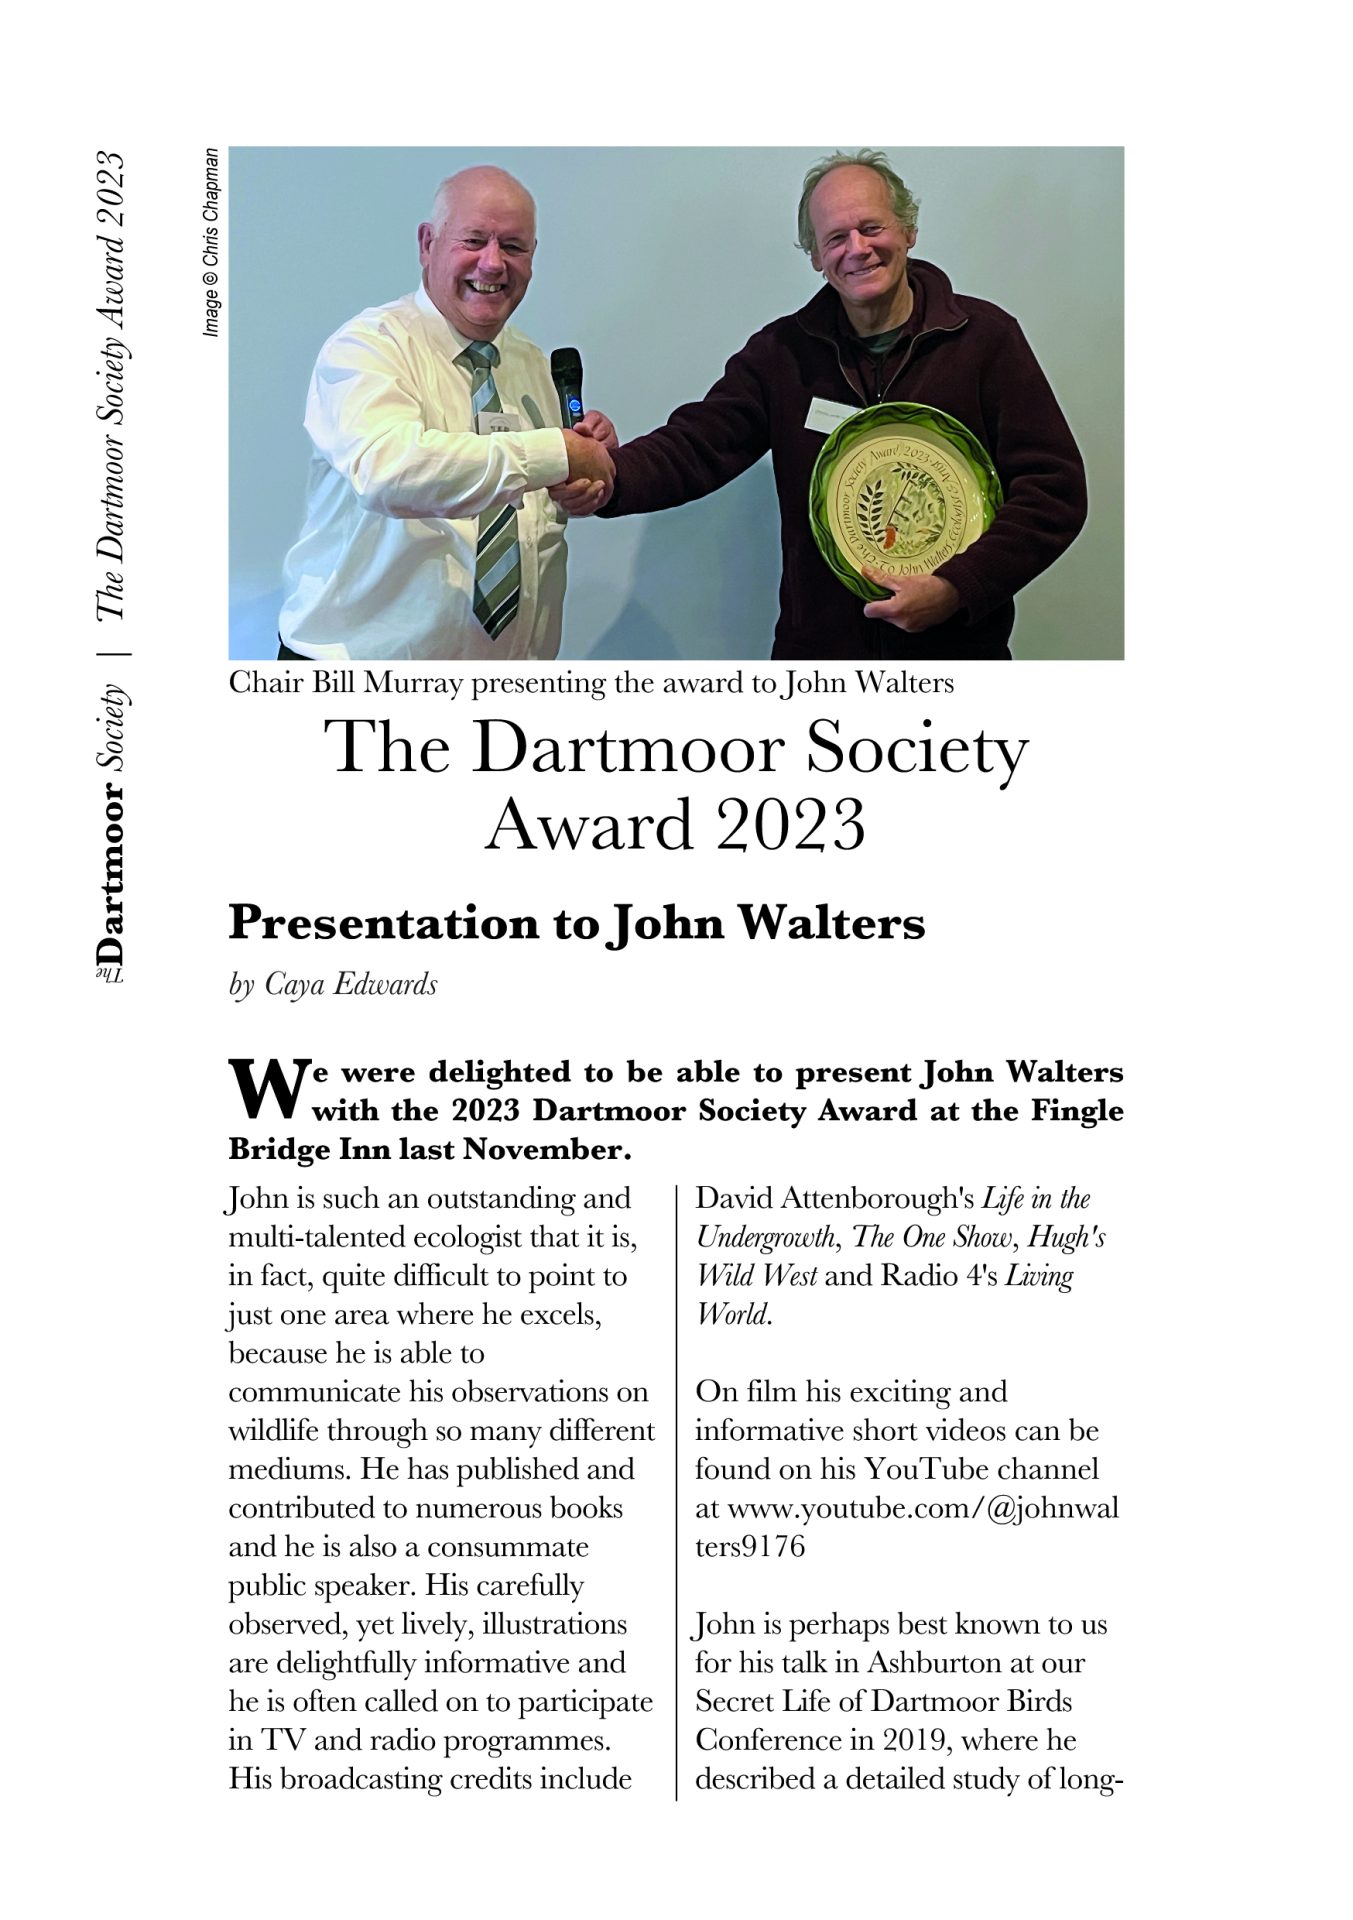 John Walters is presented with The Dartmoor Society award for 2023